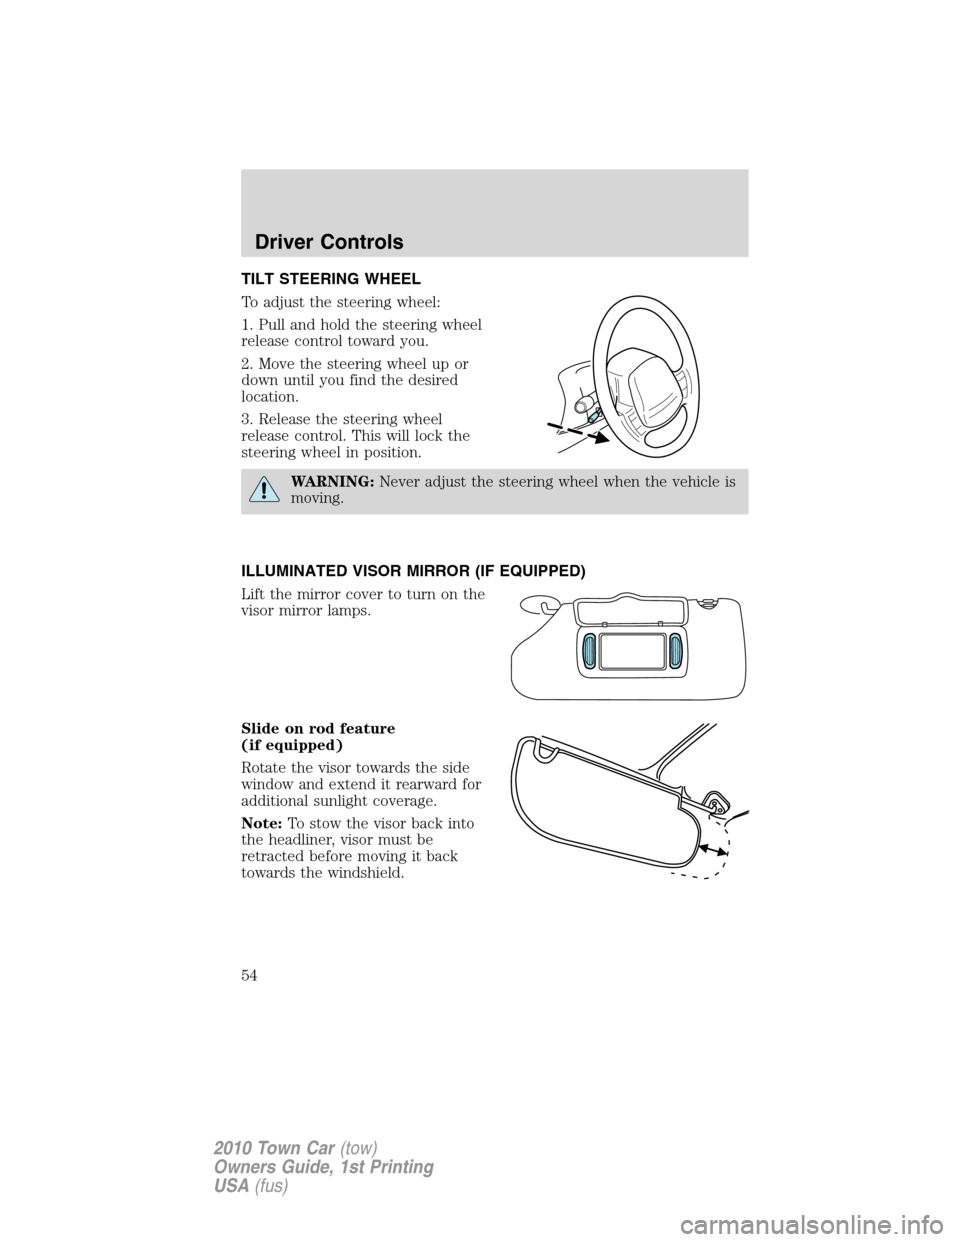 LINCOLN TOWN CAR 2010 Workshop Manual TILT STEERING WHEEL
To adjust the steering wheel:
1. Pull and hold the steering wheel
release control toward you.
2. Move the steering wheel up or
down until you find the desired
location.
3. Release 